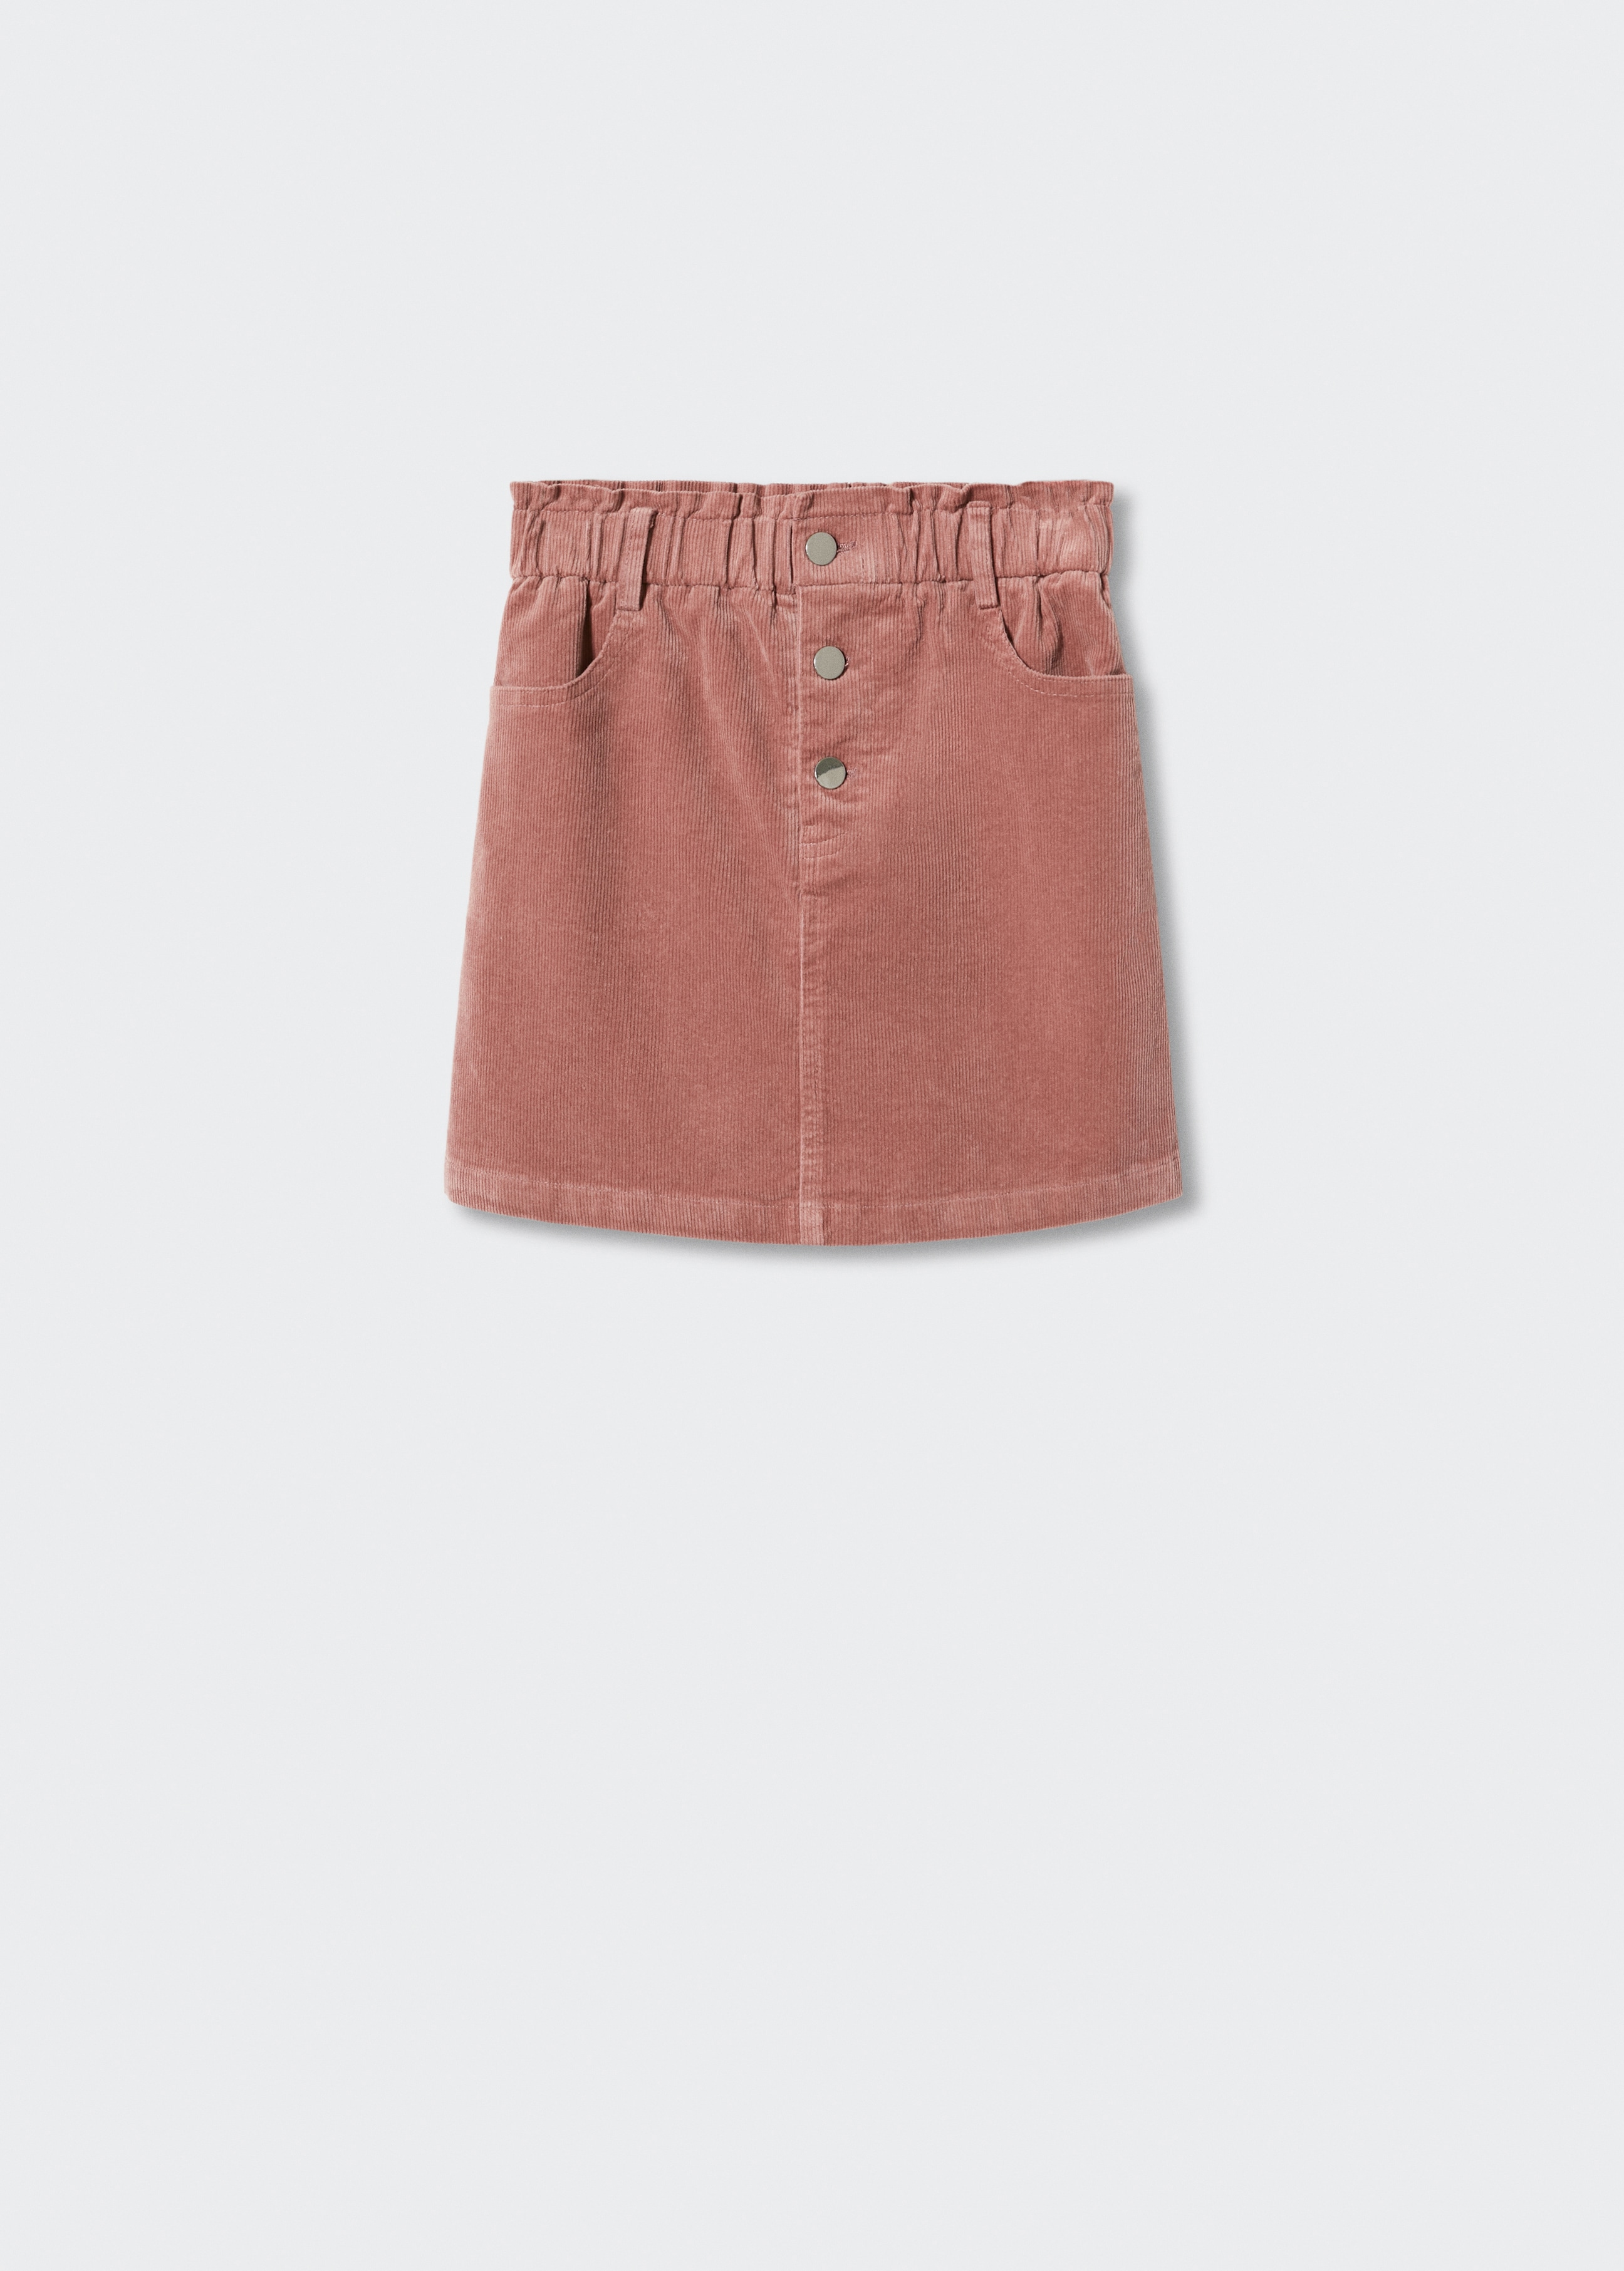 Buttoned corduroy skirt